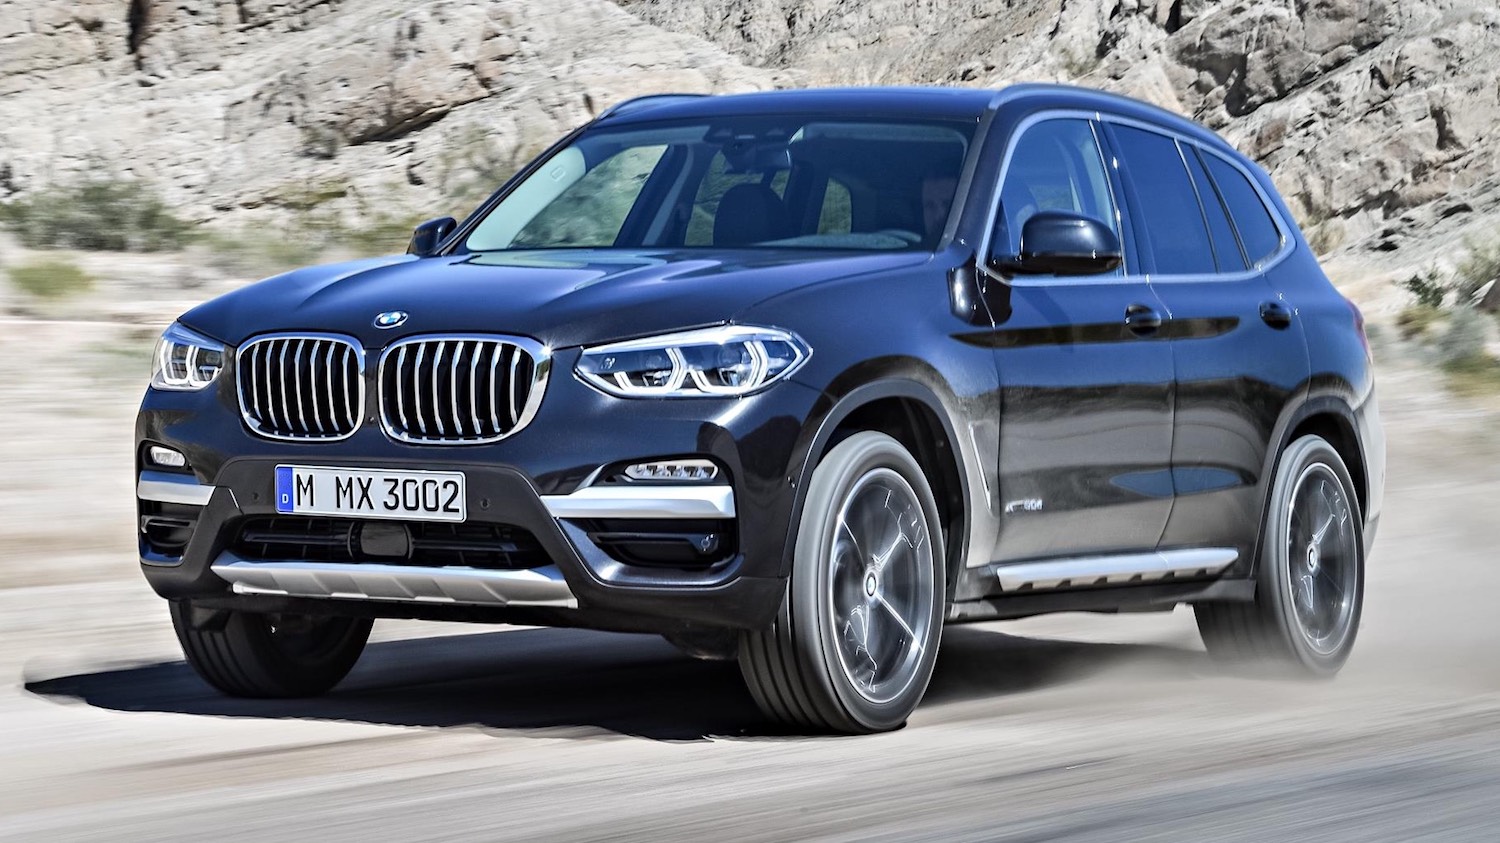 Neil Lyndon takes a spin in the latest BMW X3 M-Sport 3